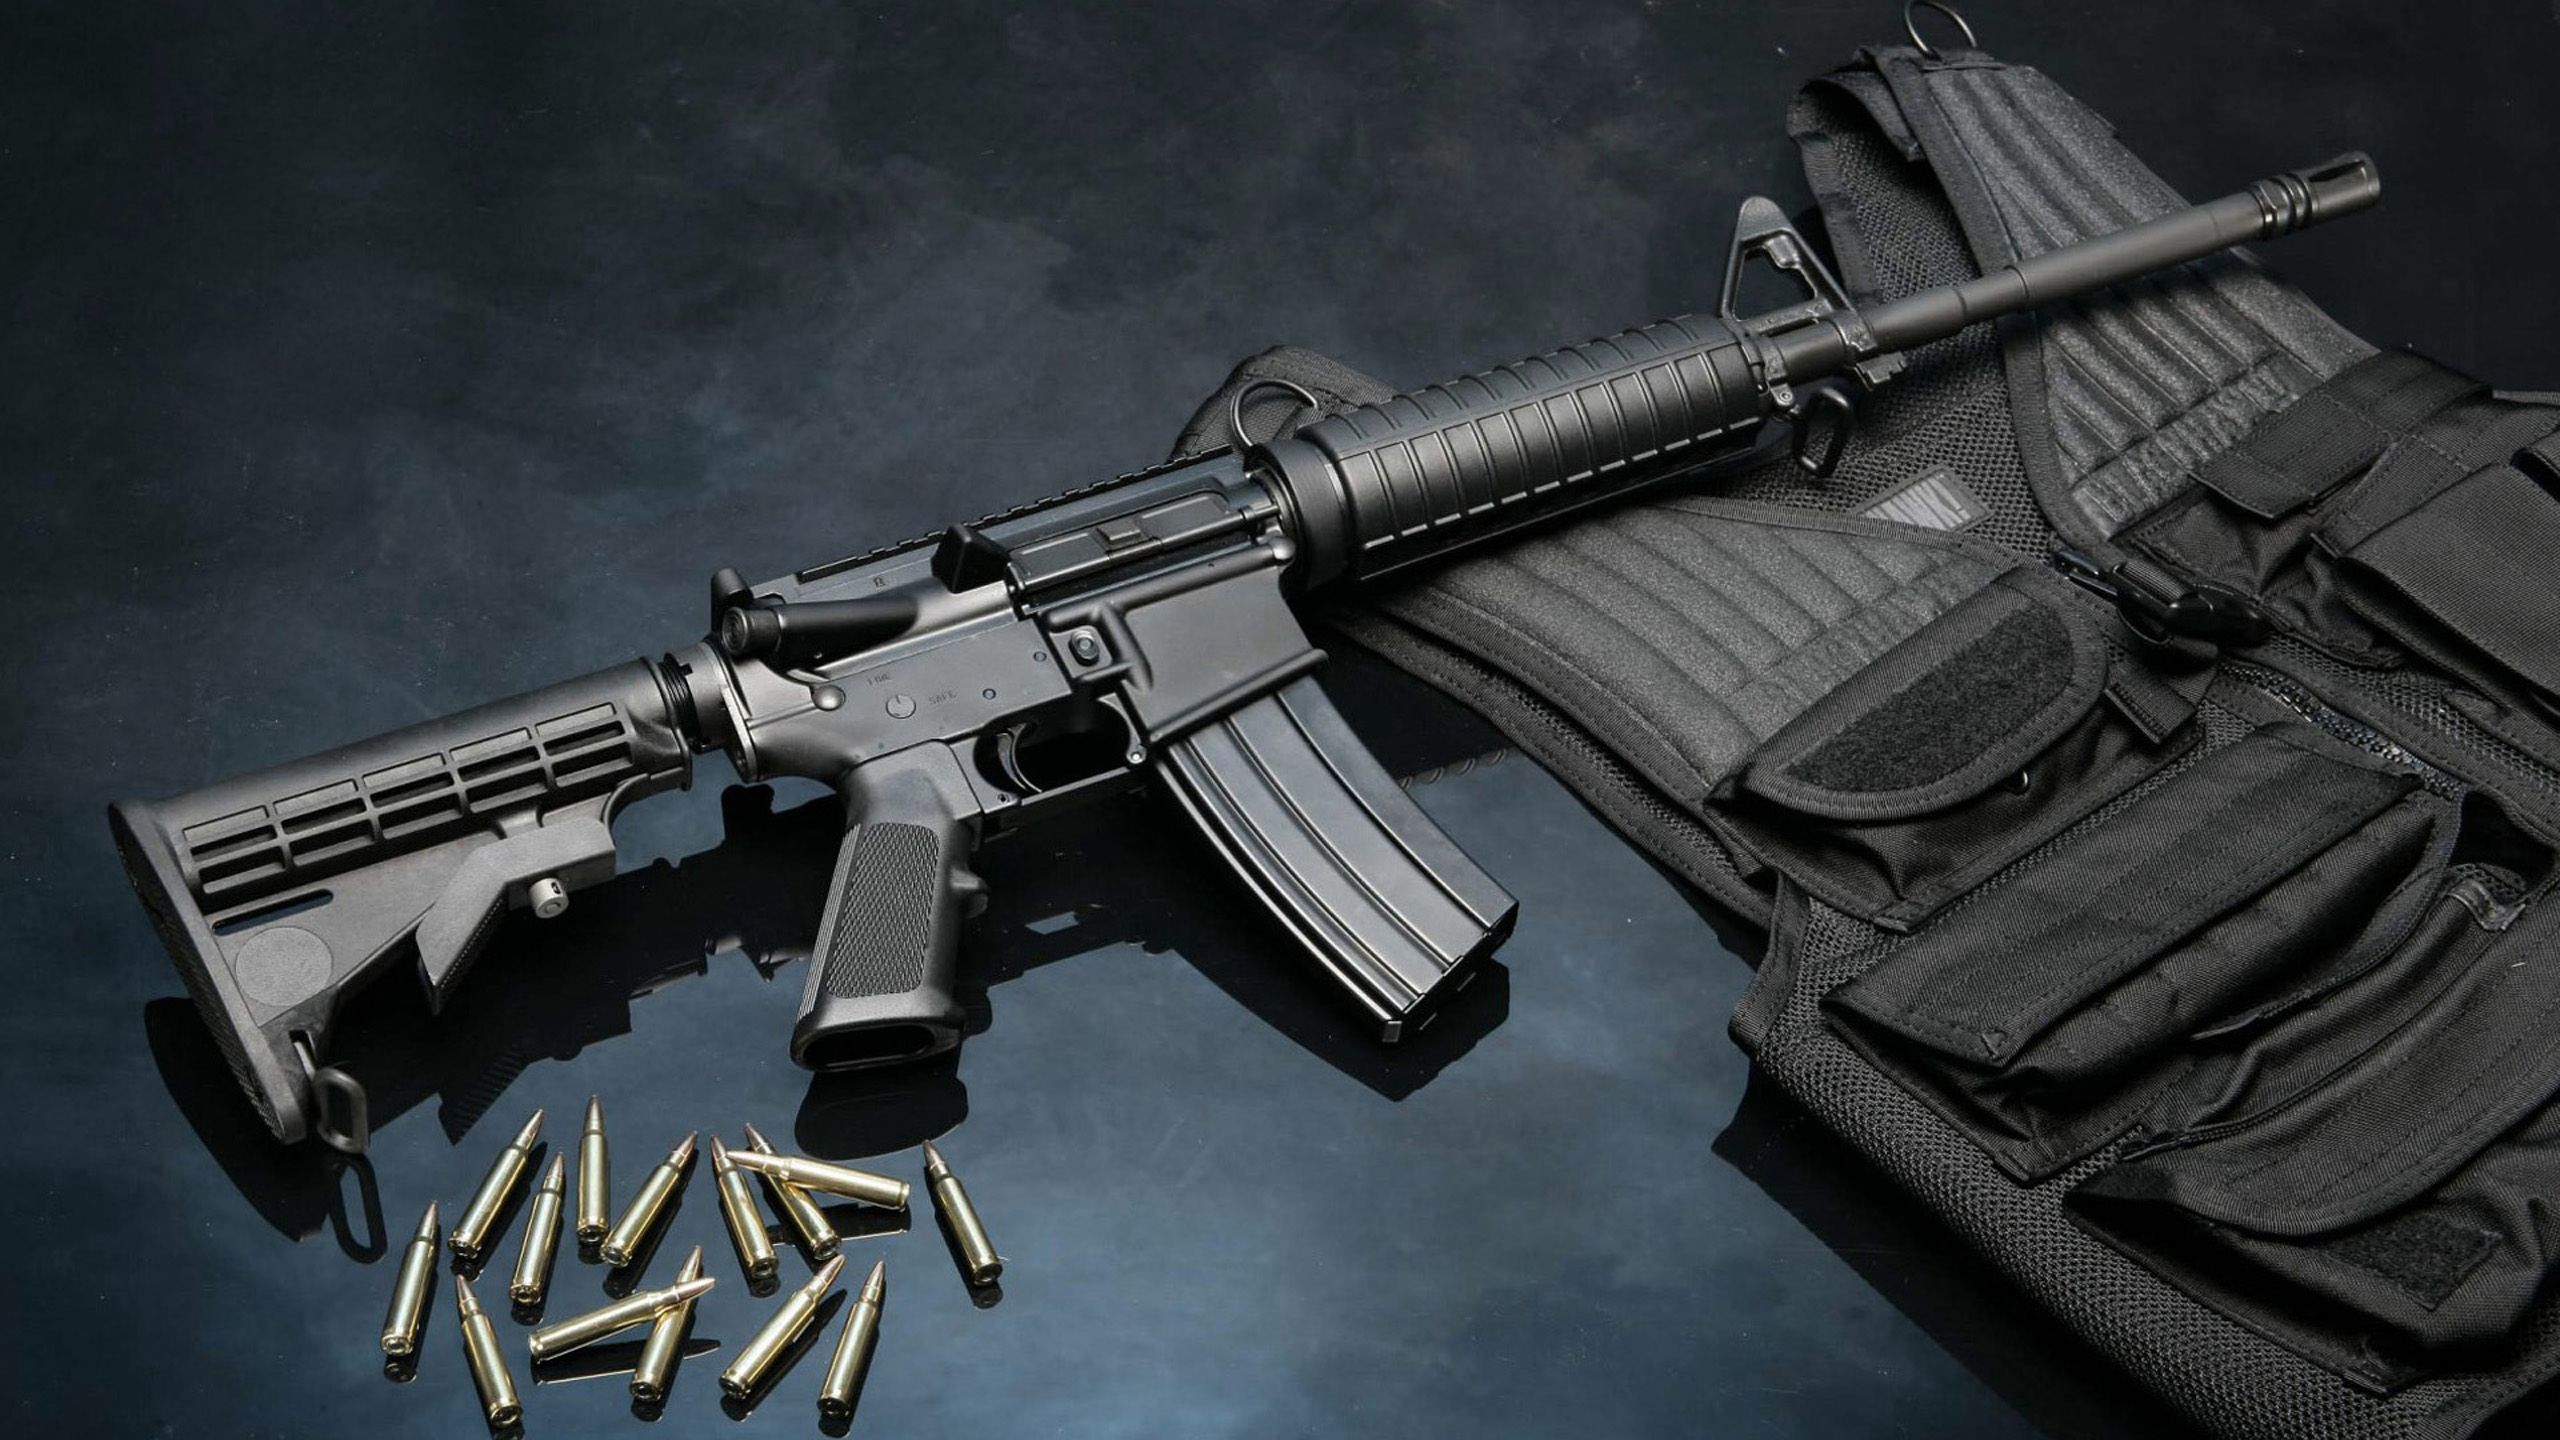 Download Colt Ar 15 wallpapers for mobile phone free Colt Ar 15 HD  pictures